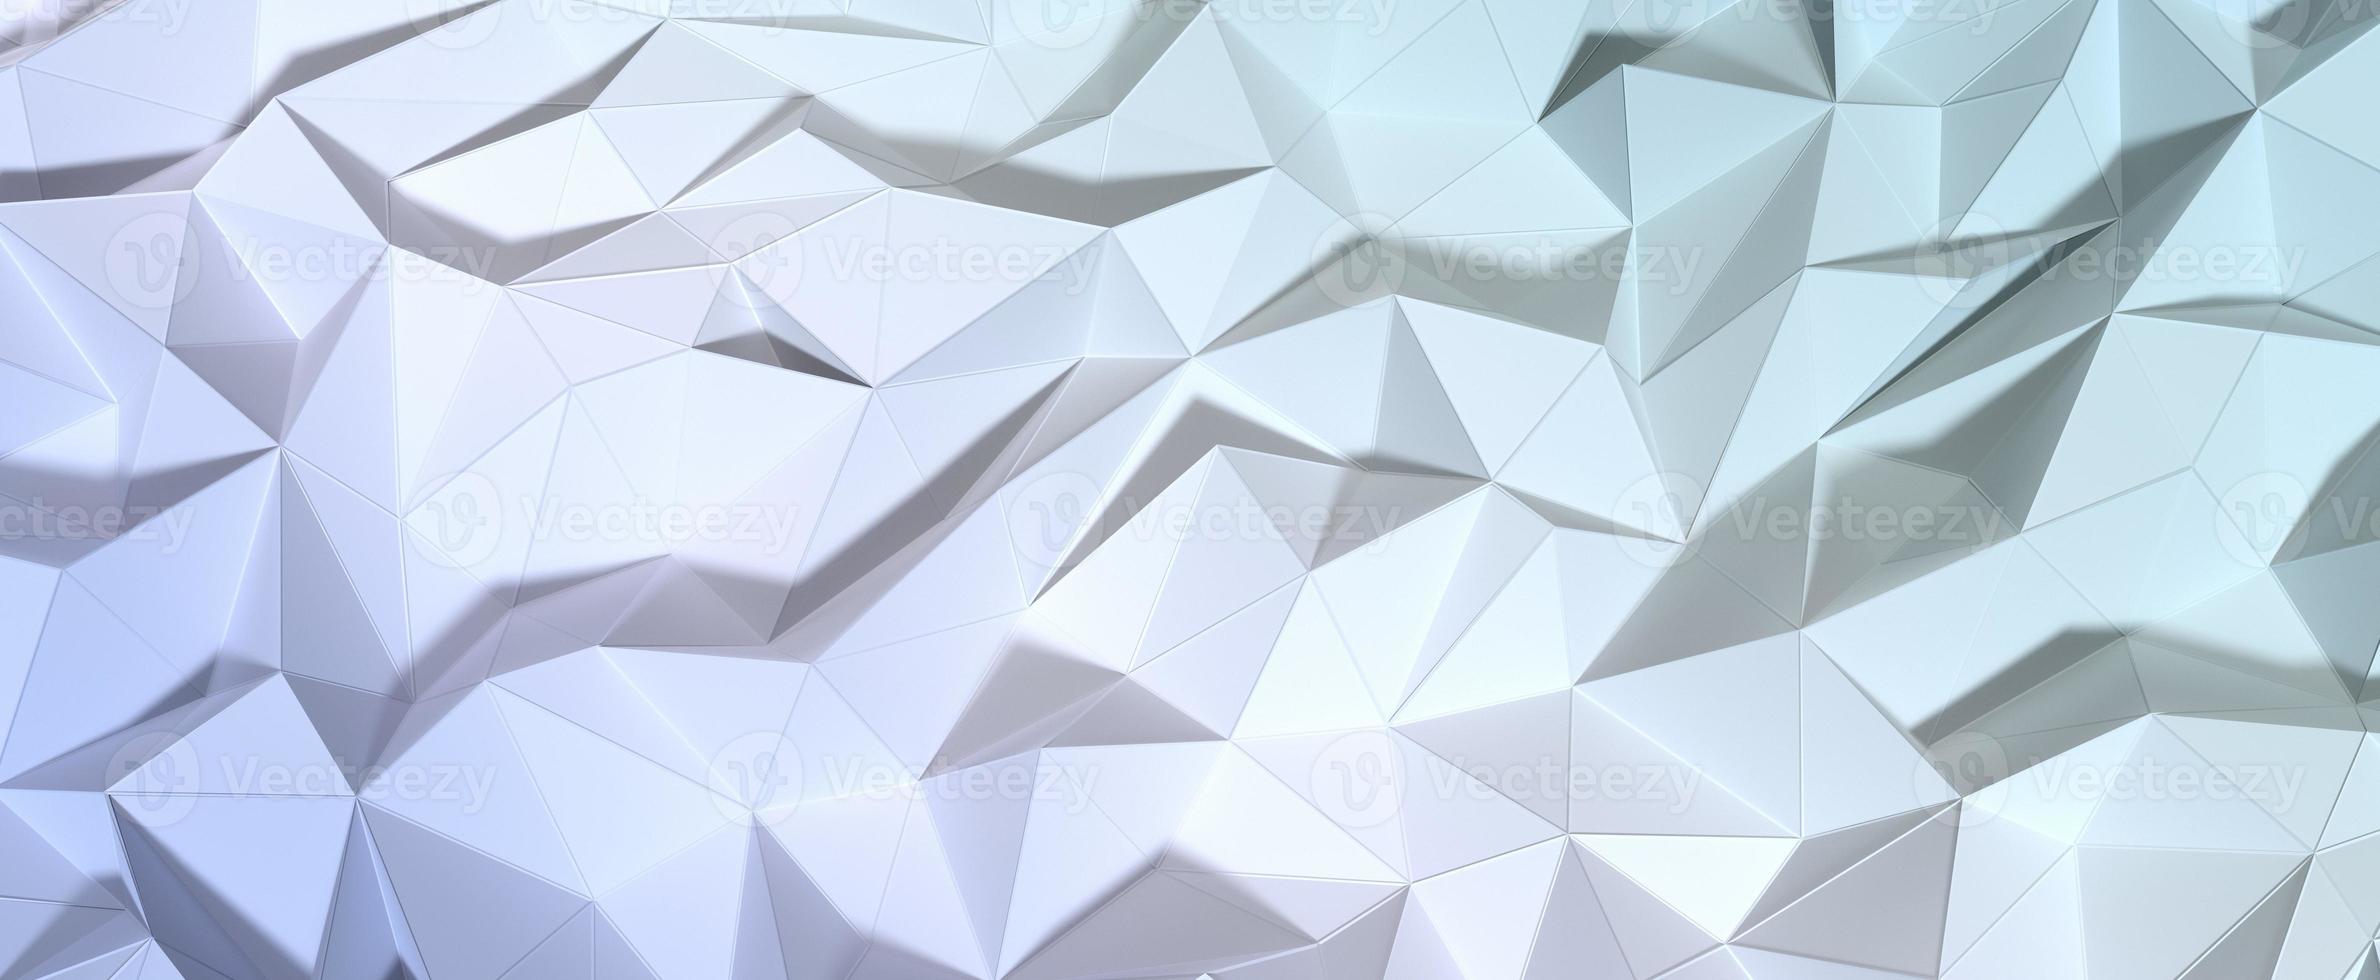 Polygonal crystalline surface with muted gradient. Geometric 3d render mesh mosaic with beige and silver tint. Triangular digital textures stacked in creative formations with futuristic interior photo